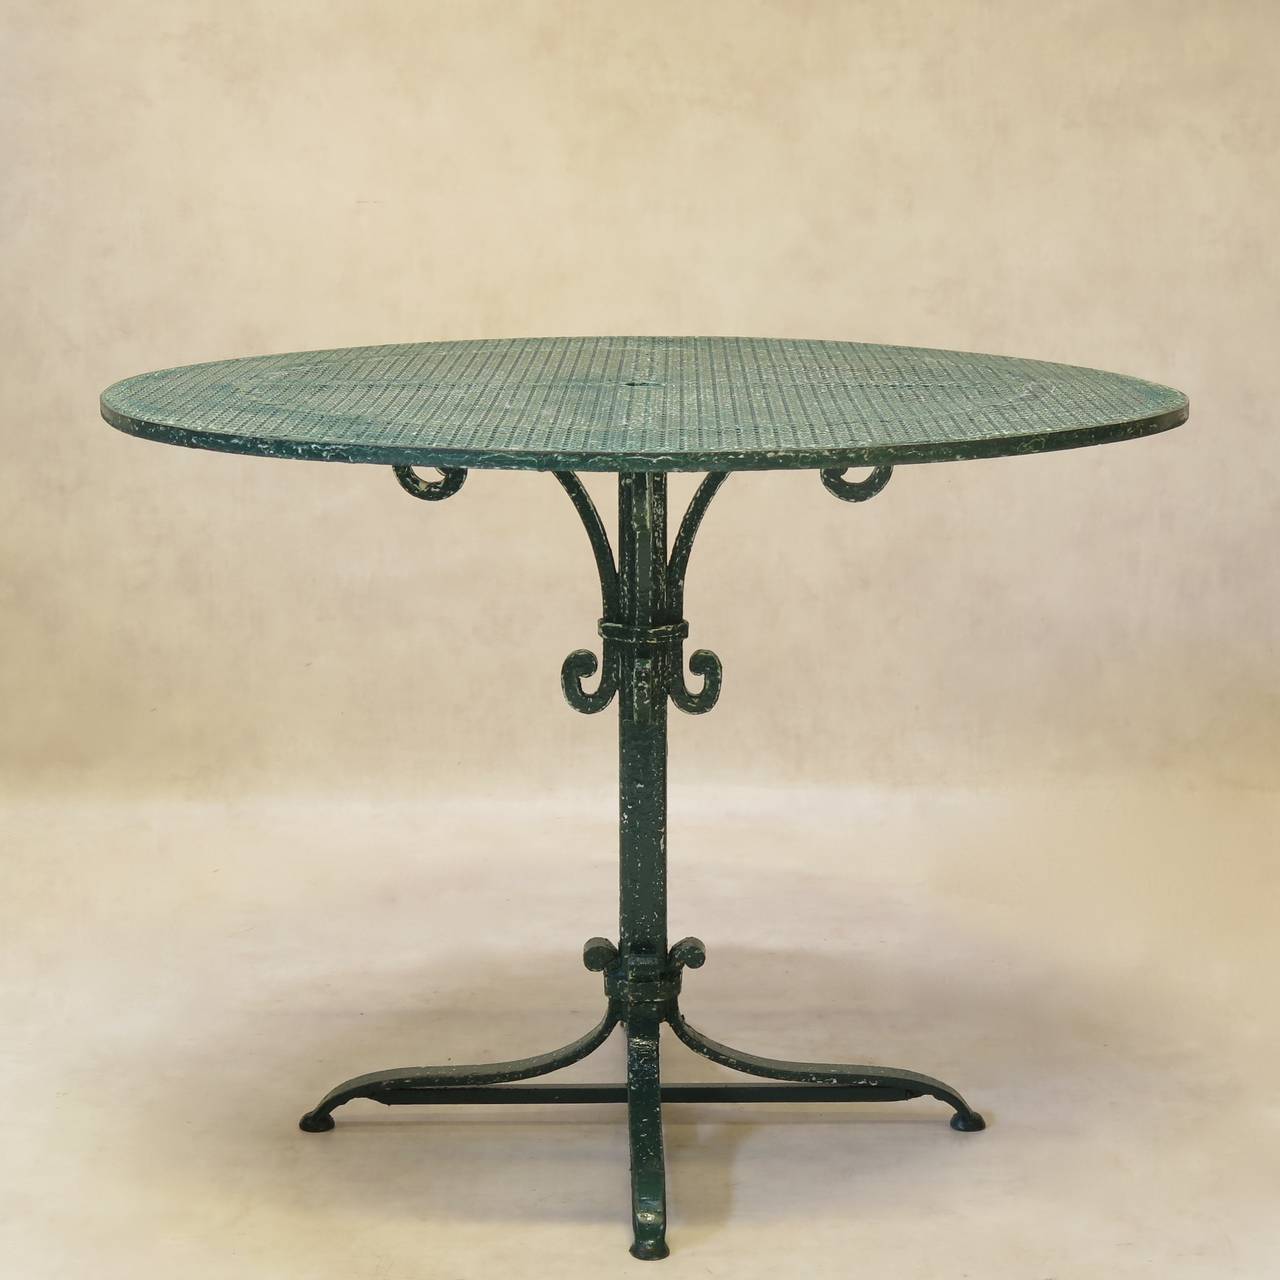 French Elegant Pair of Wrought Iron Garden Tables - France, Circa 1920s